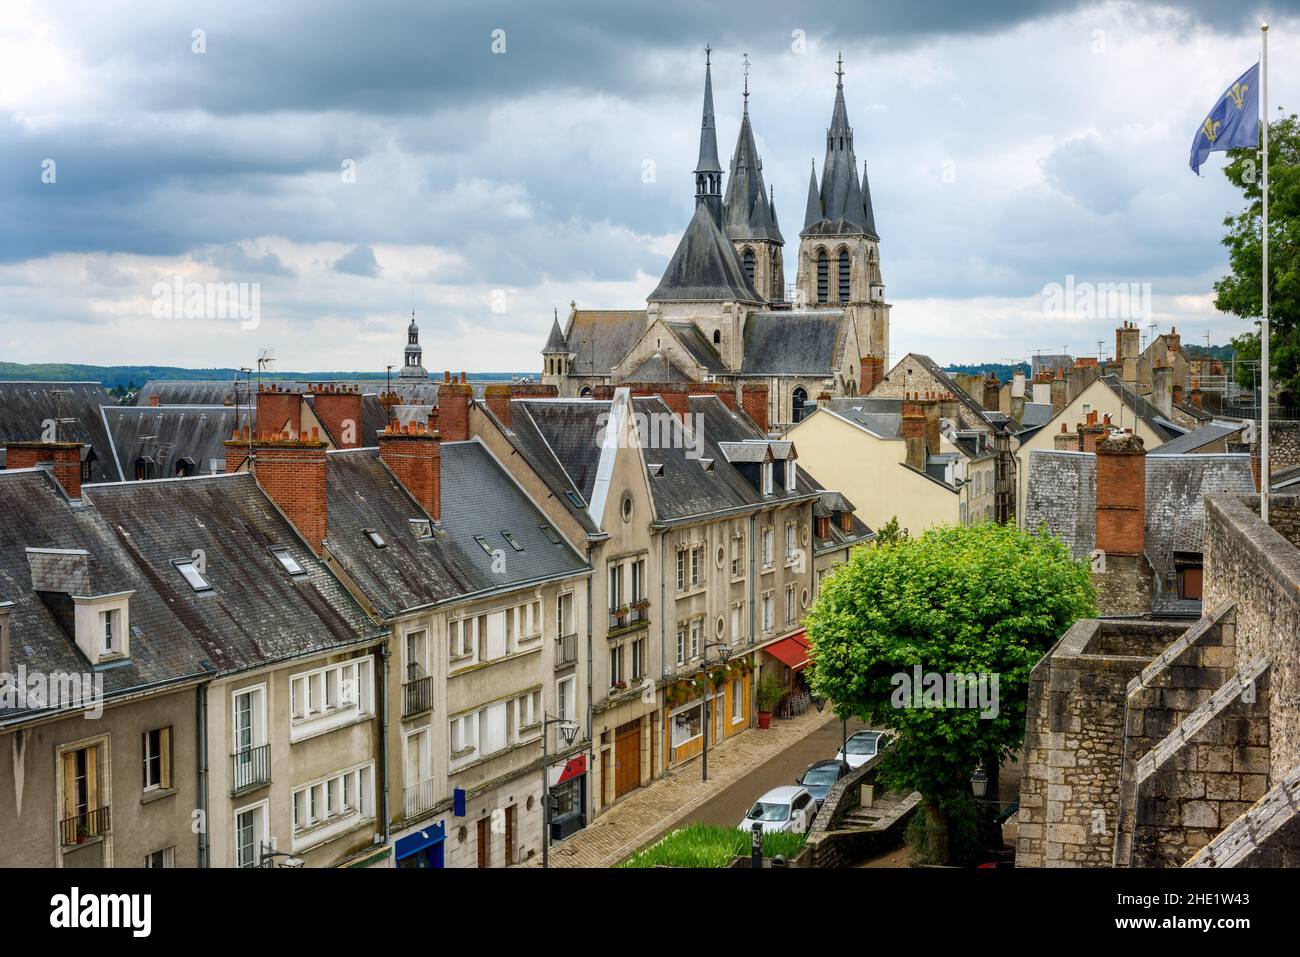 The Saint Nicolas church and the roofs of historical Old town of Blois city, France Stock Photo